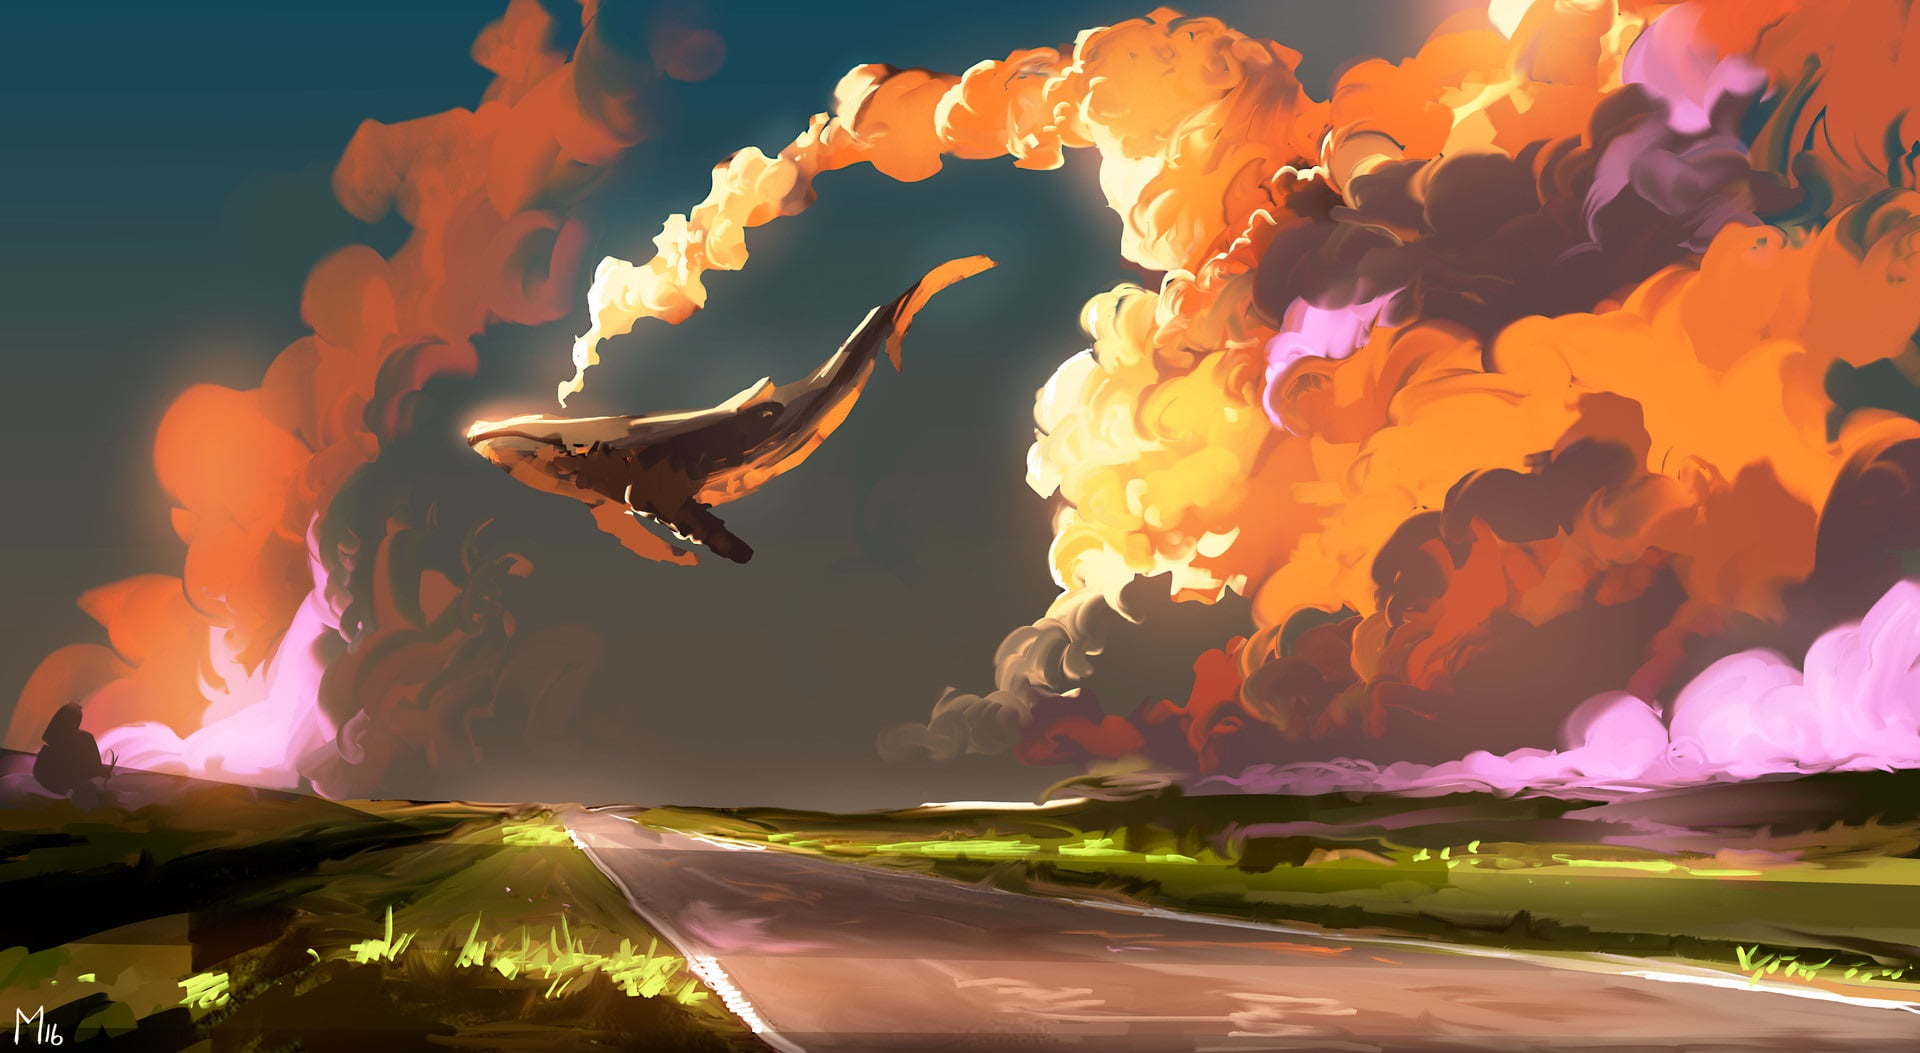 whale on sky near clouds above road painting